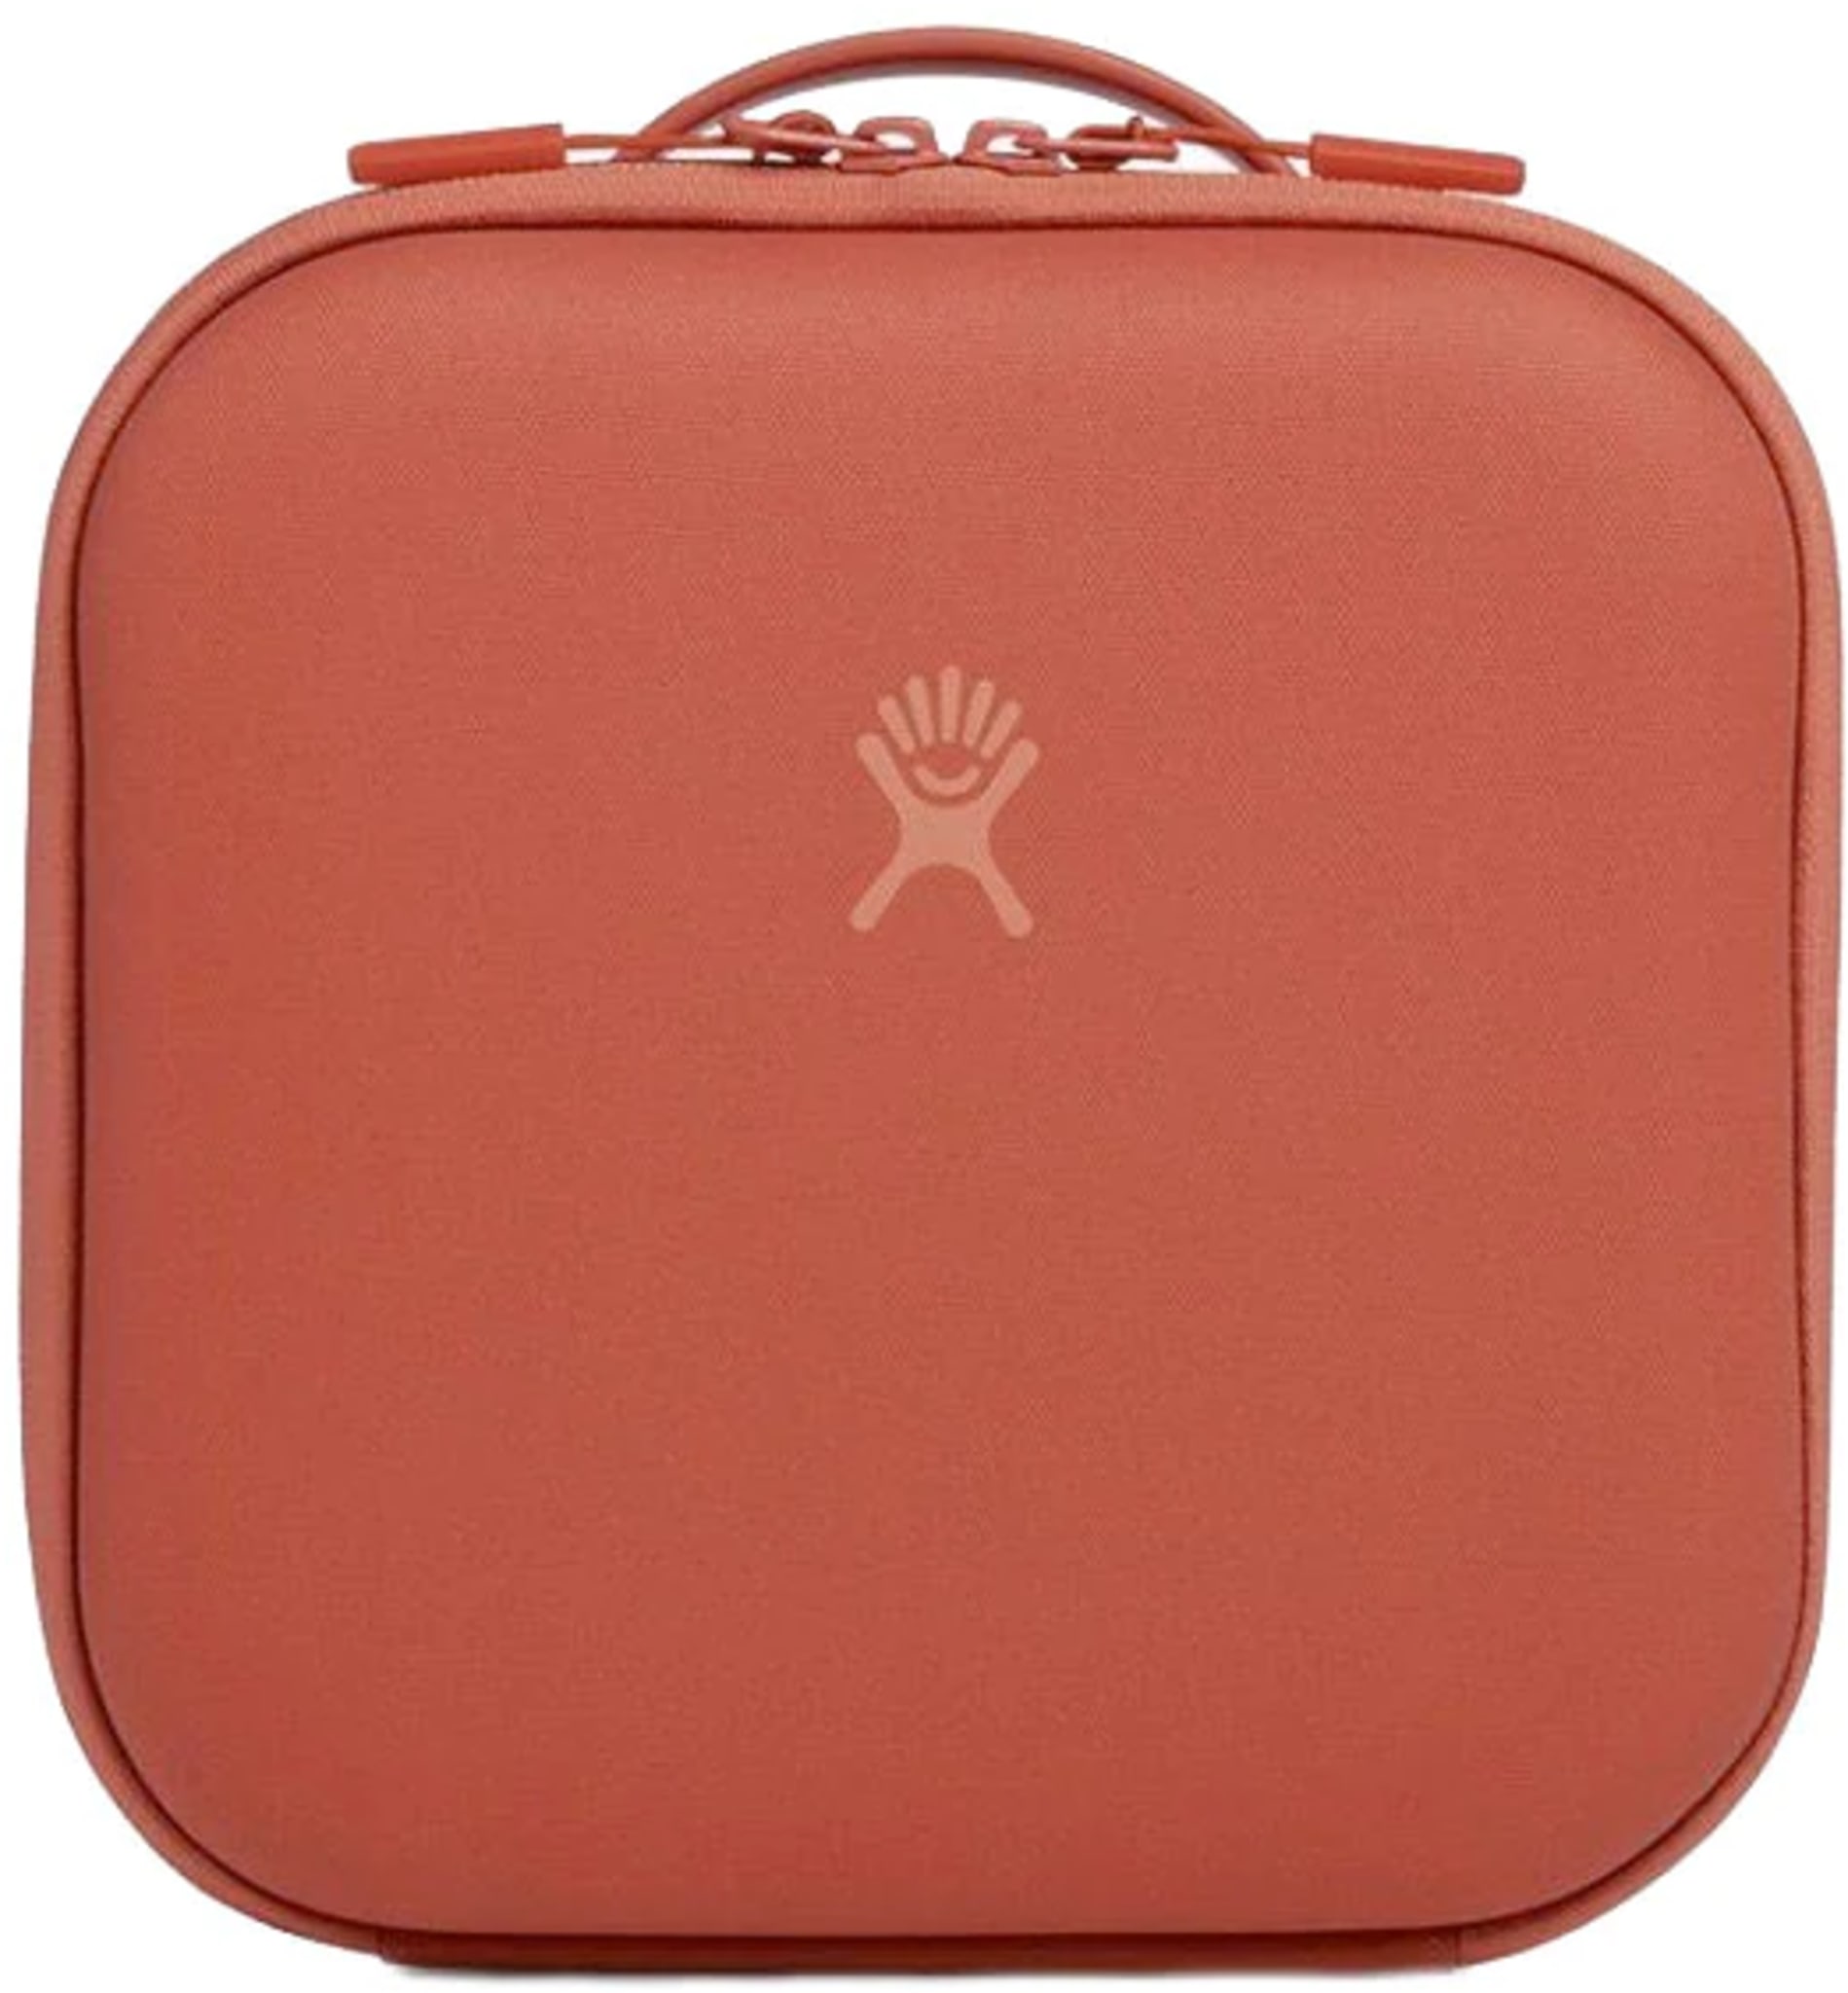 SMALL INSULATED LUNCH BOX